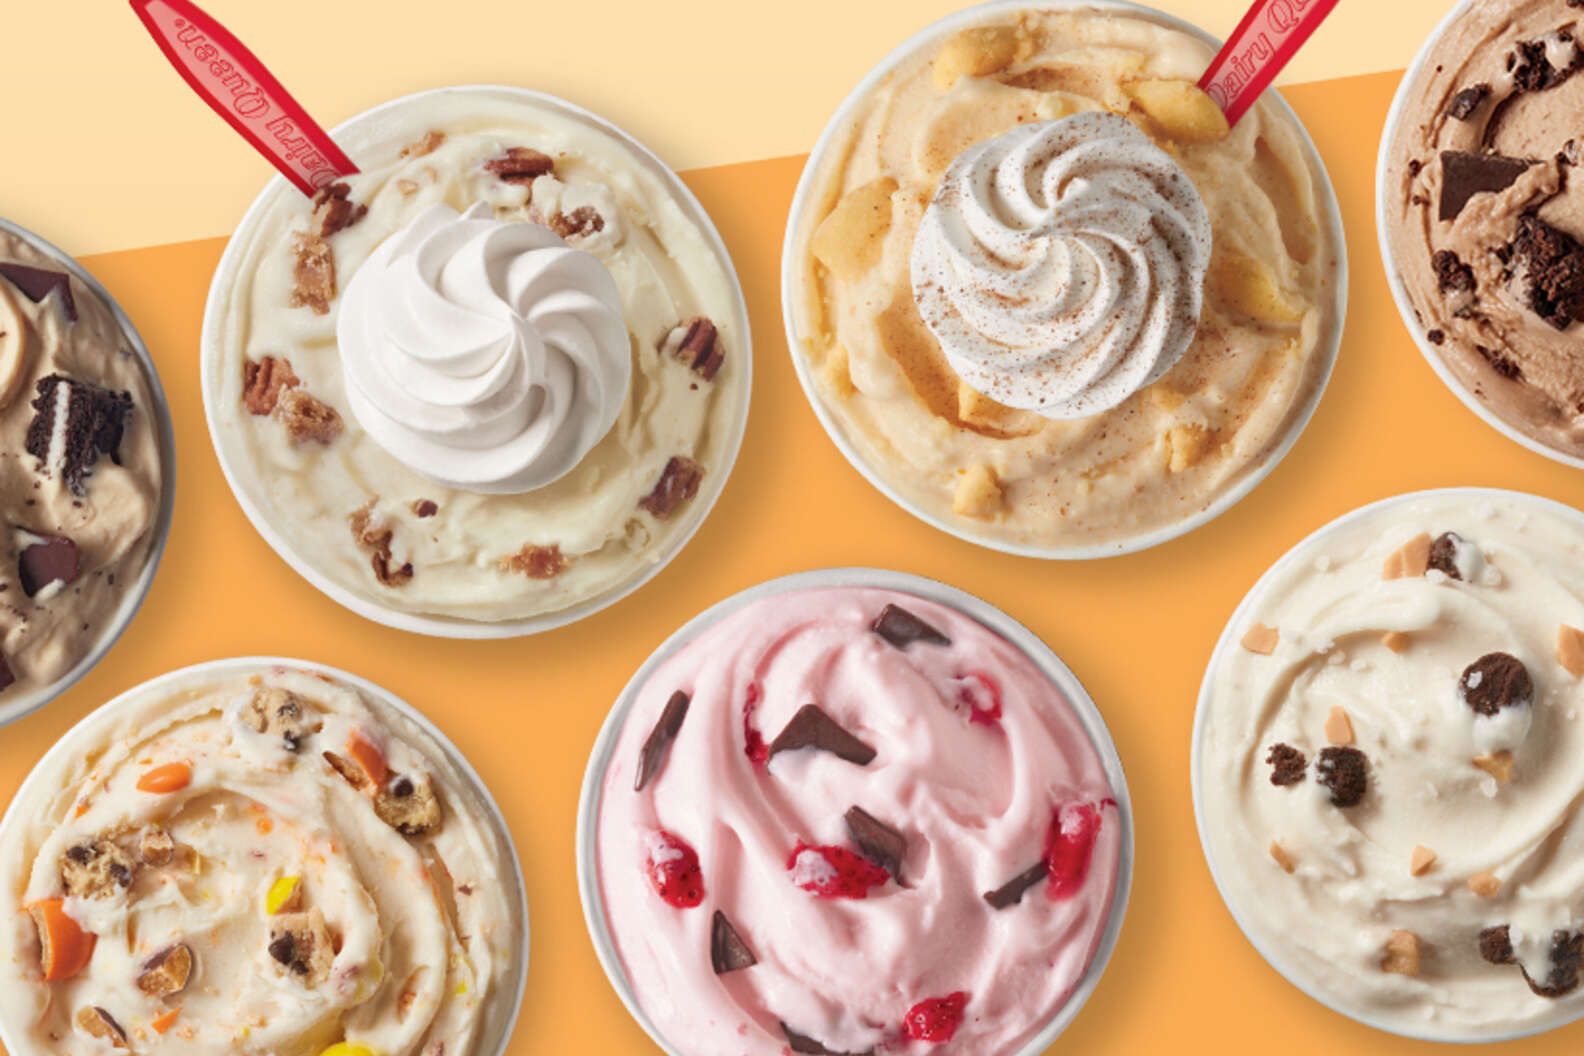 3 Decadent New Blizzards are Now Available at Dairy Queen: Pecan Pie, Sea Salt Toffee Fudge and Reese's Pieces Cookie Dough